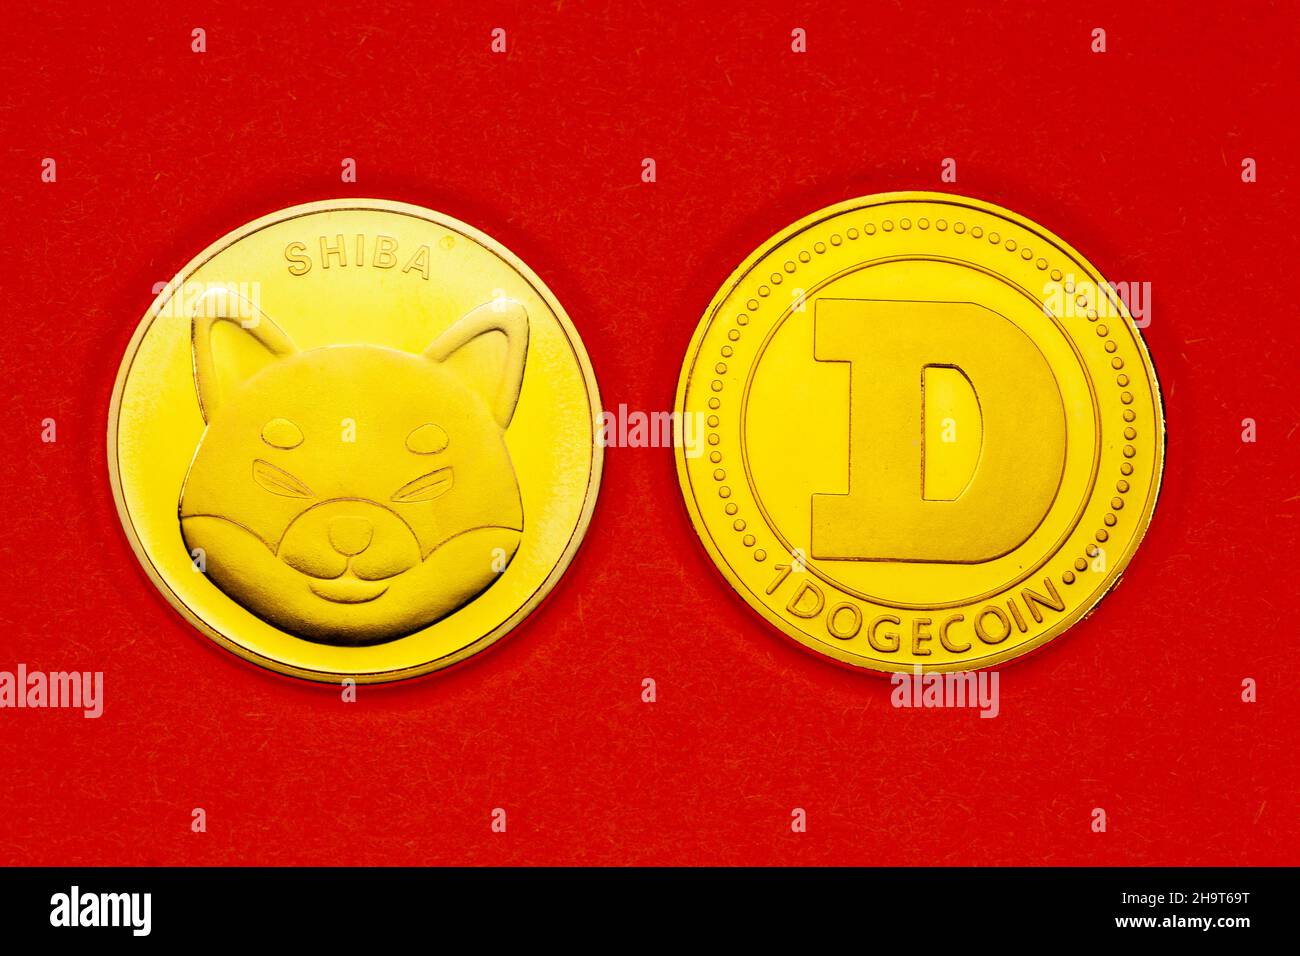 Shiba Inu and Doge coin meme cryptocurrency coins Stock Photo